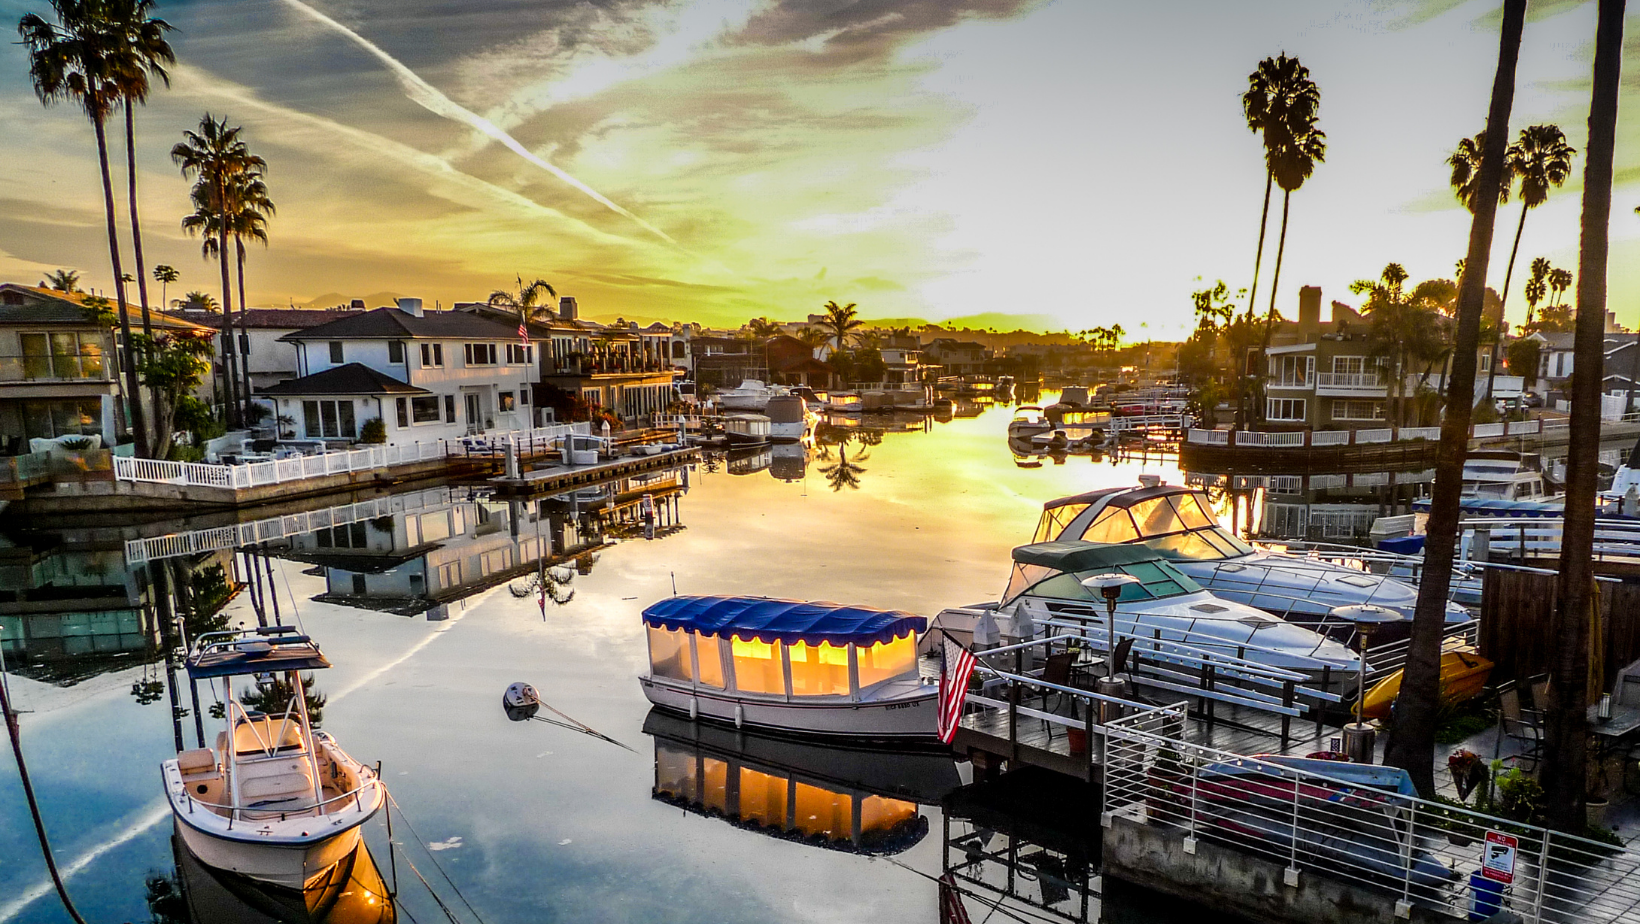 boat launches next to houses in the bay of newport beach